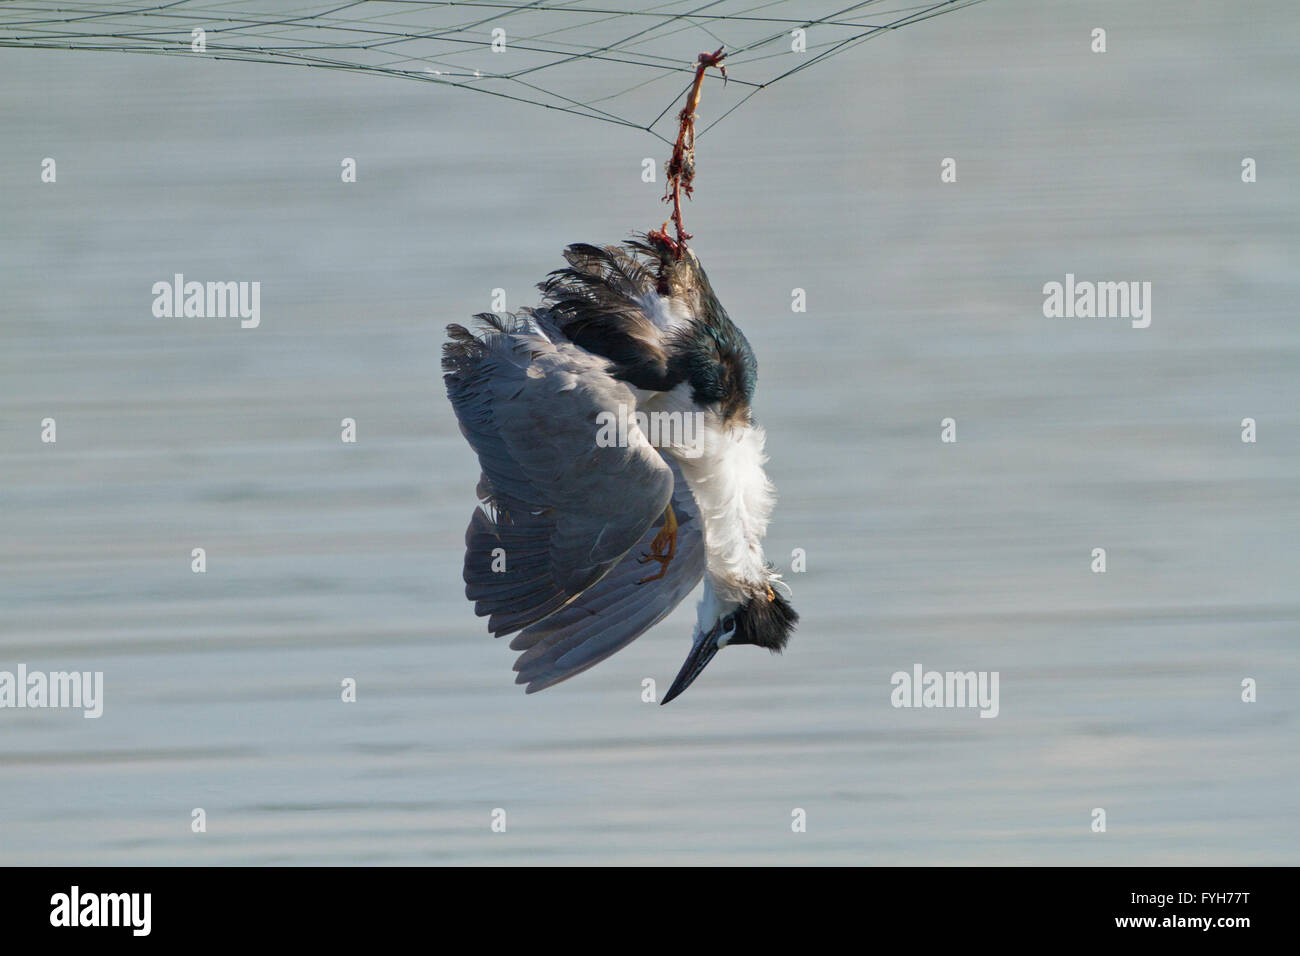 A dead Heron caught in  net over a fish breeding pool. The net is placed over the pool to prevent seabirds from feeding on the f Stock Photo